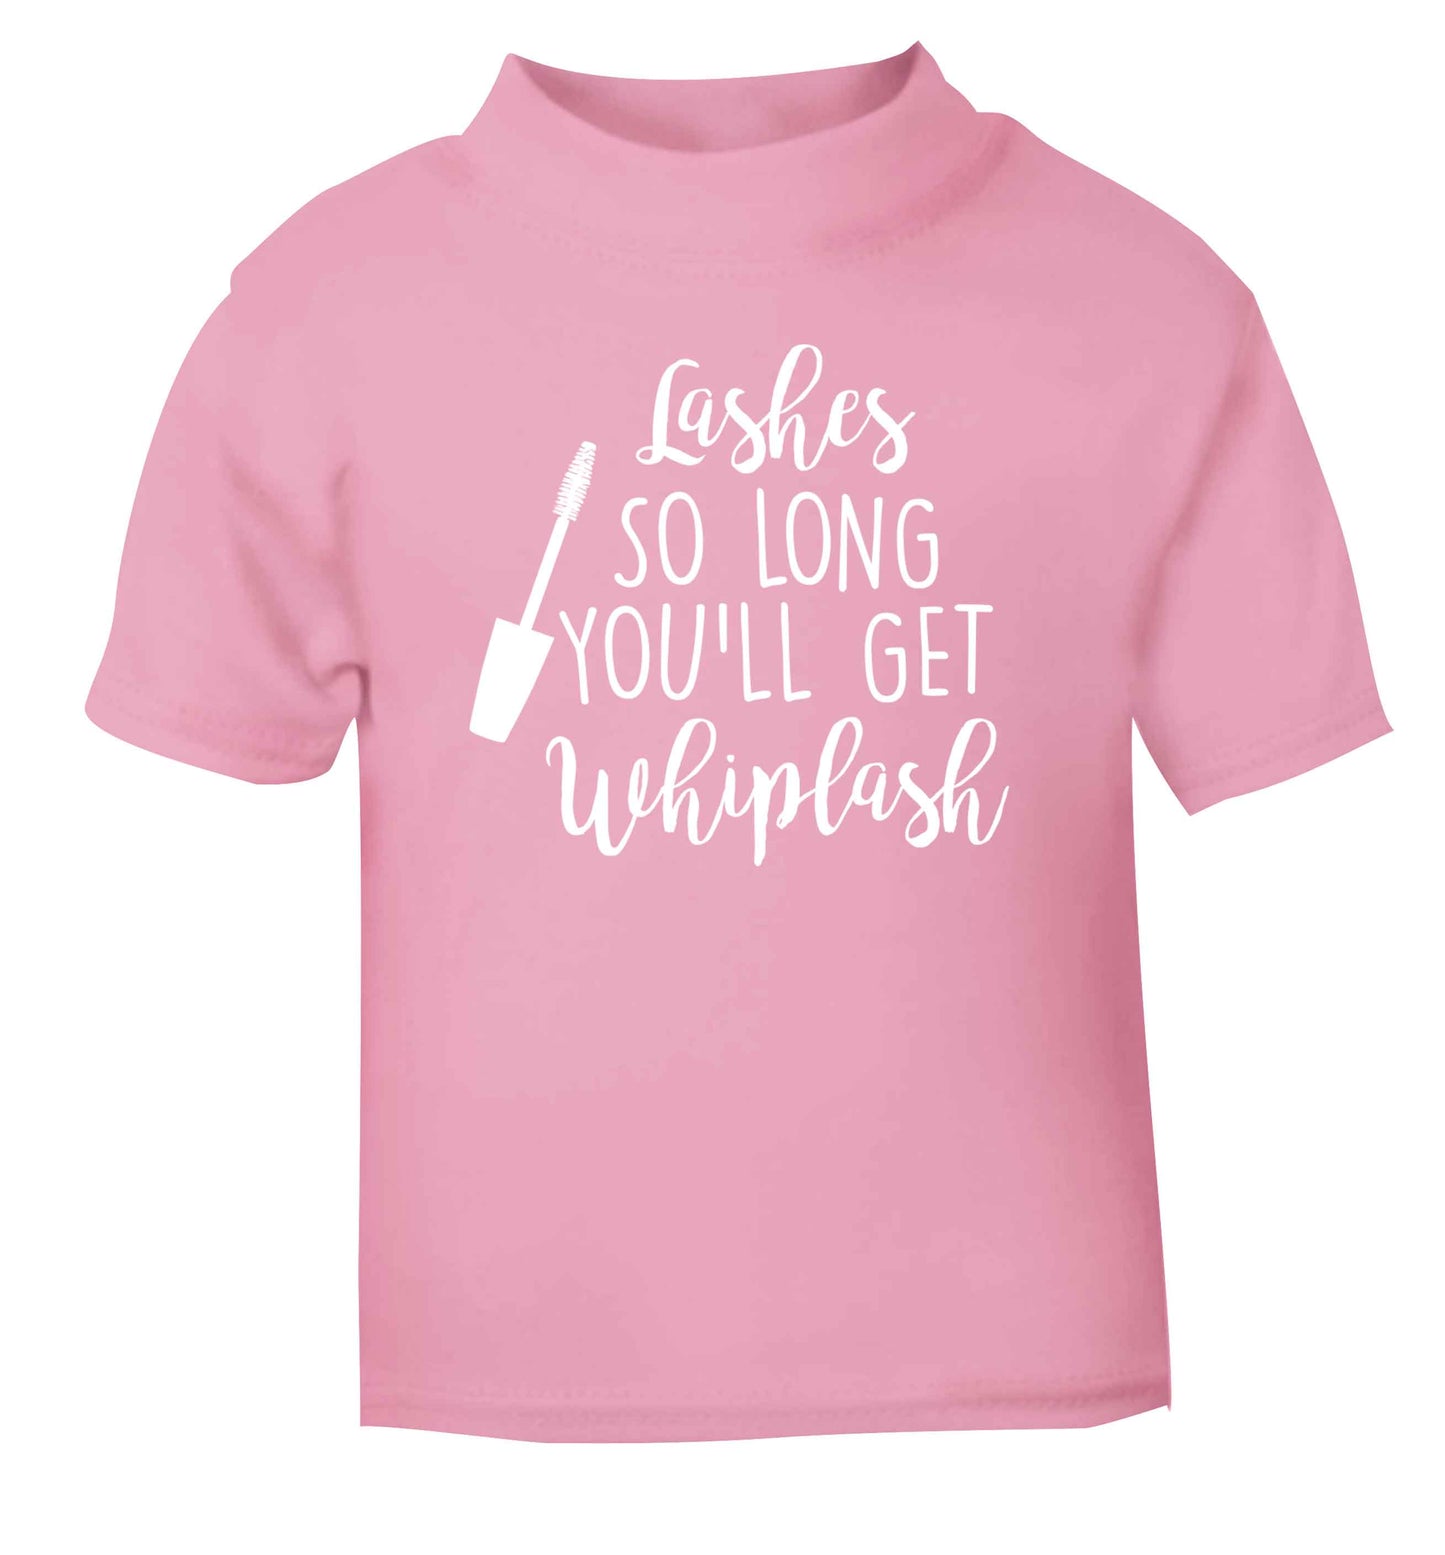 Lashes so long you'll get whiplash light pink Baby Toddler Tshirt 2 Years